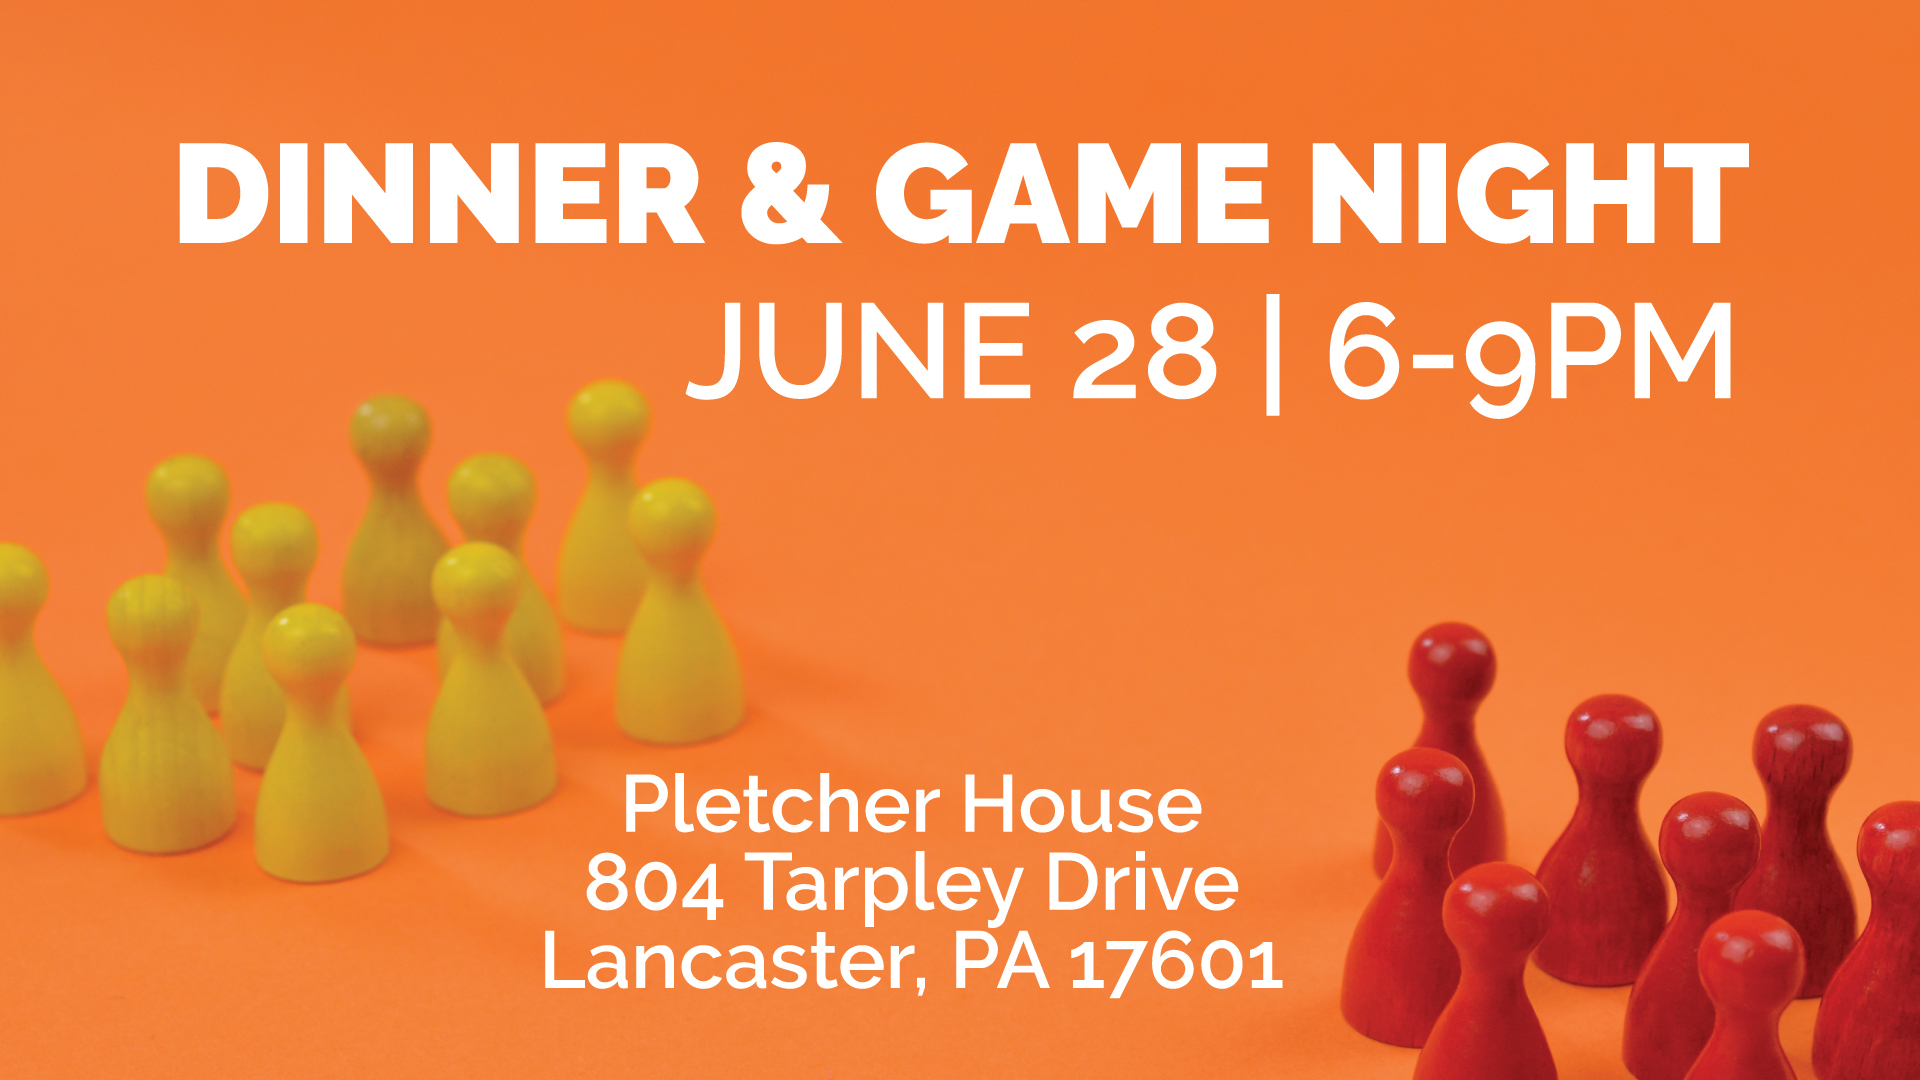 Dinner & Game Night | June 28 from 6-9PM. The Pletcher House: 804 Tarpley Drive, Lancaster, PA 17601